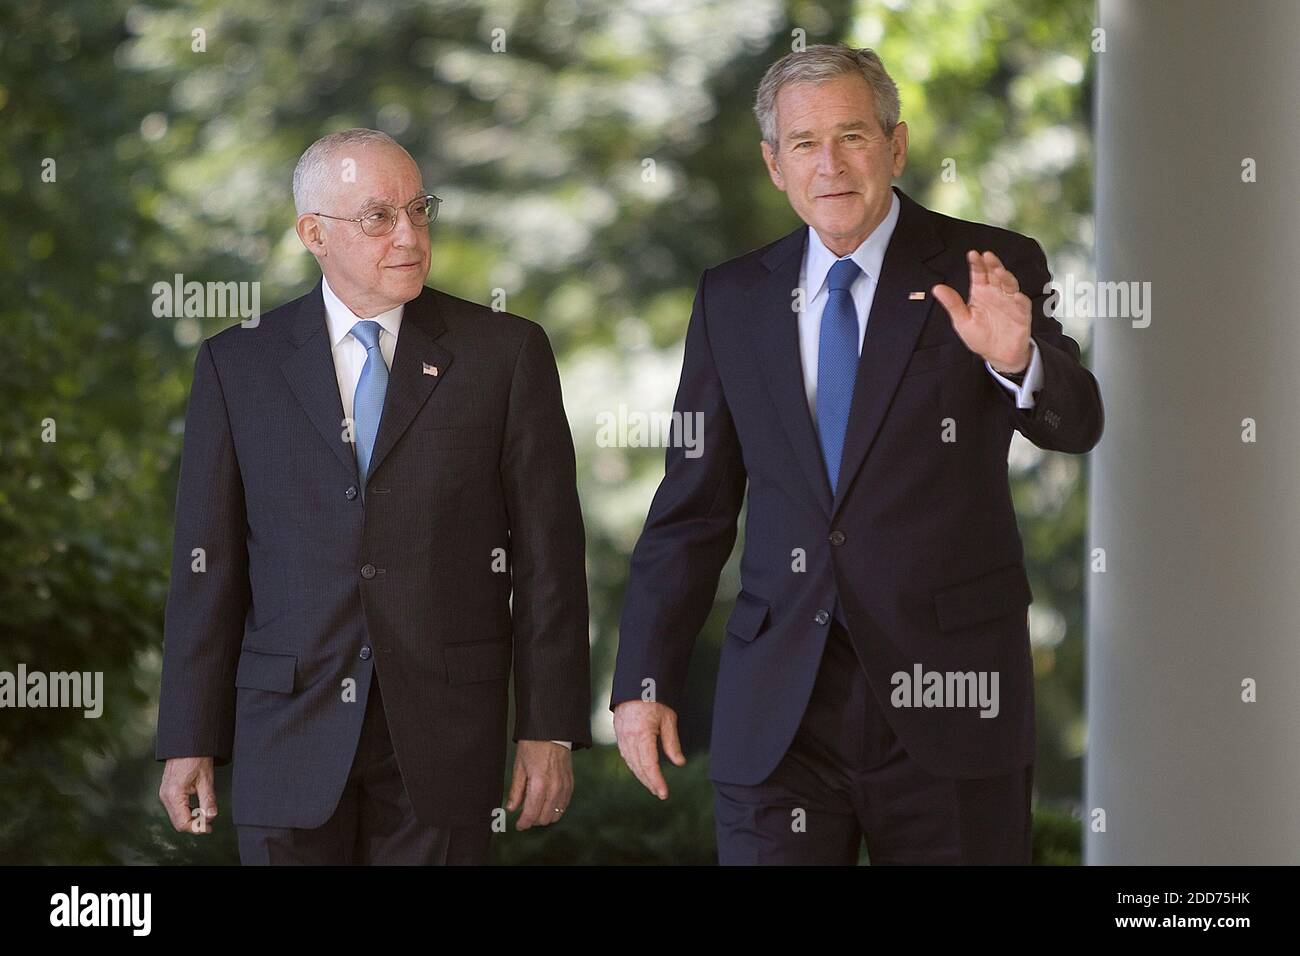 NO FILM, NO VIDEO, NO TV, NO DOCUMENTARY - President George W. Bush walks to the Rose Garden with his nominee for the new U.S. Attorney General, retired New York judge Michael Mukasey (left), in Washington, D.C., USA on September 17, 2007. Mukasey, 66, would replace Alberto Gonzales, who resigned last month after he became embroiled in controversy over the firings of nine federal prosecutors. Photo by Chuck Kennedy/MCT/ABACAPRESS.COM Stock Photo